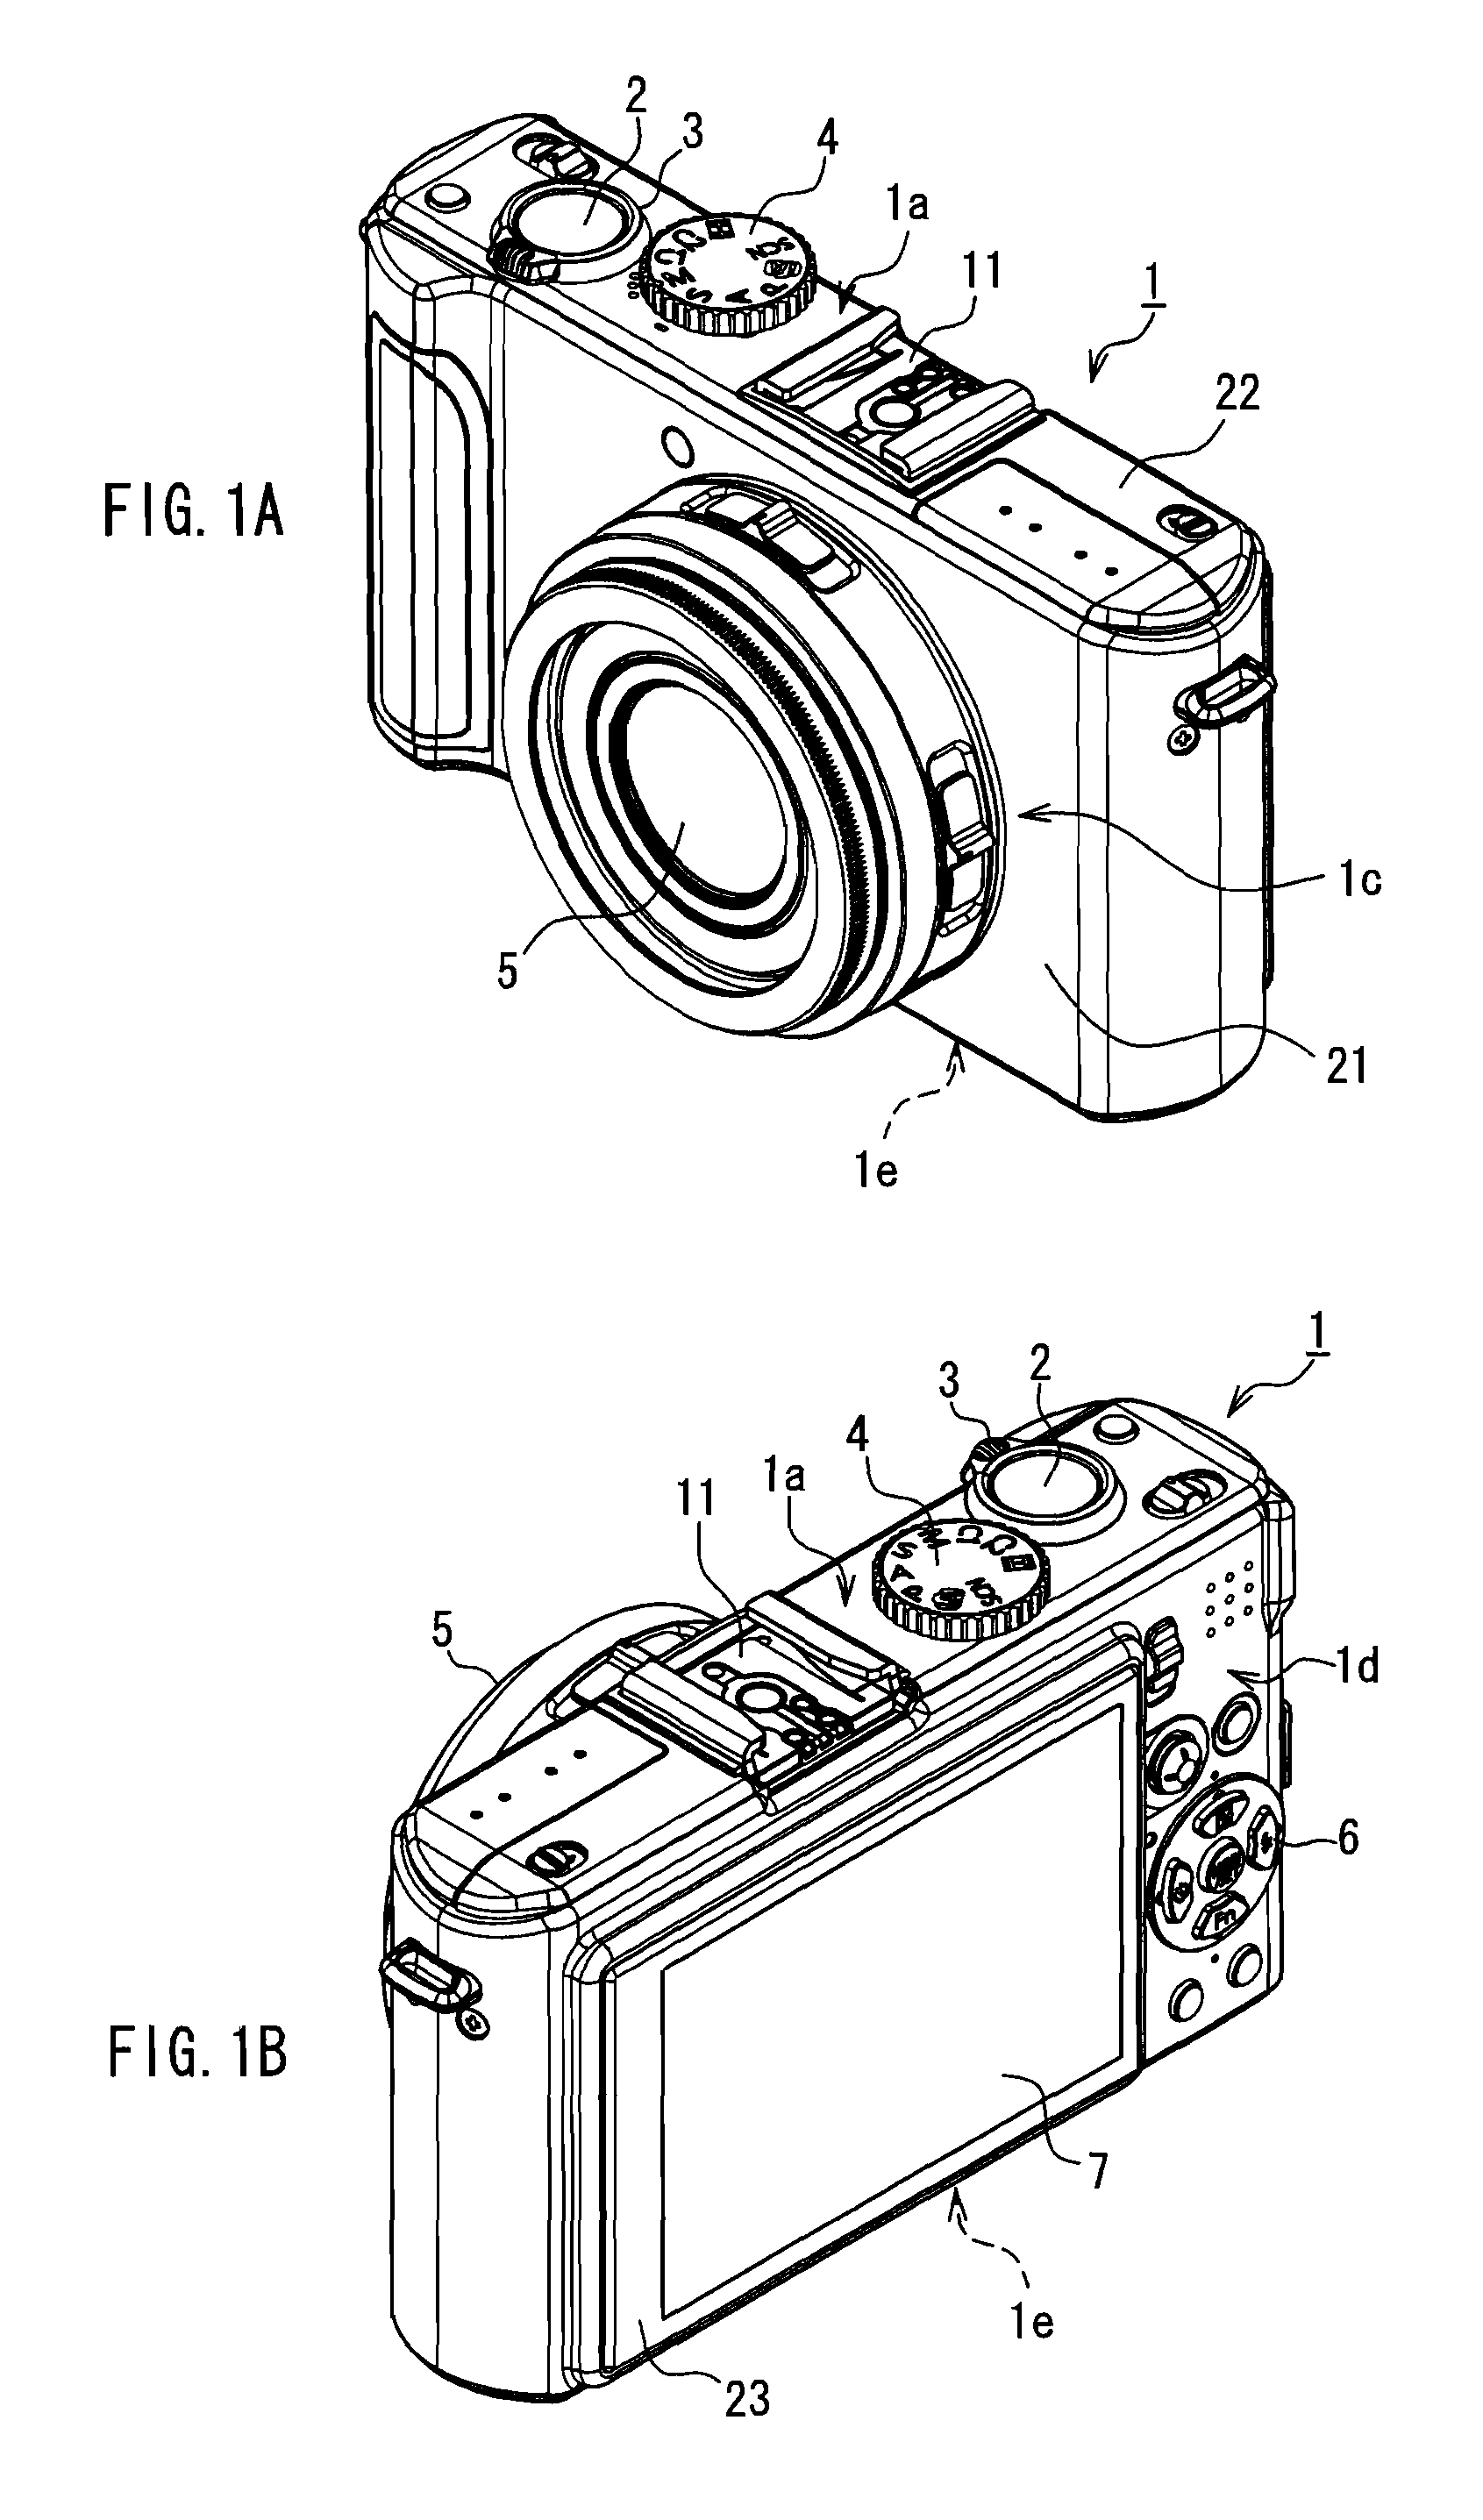 Camera casing including accessory shoe for allowing the attachment of various/plural external devices